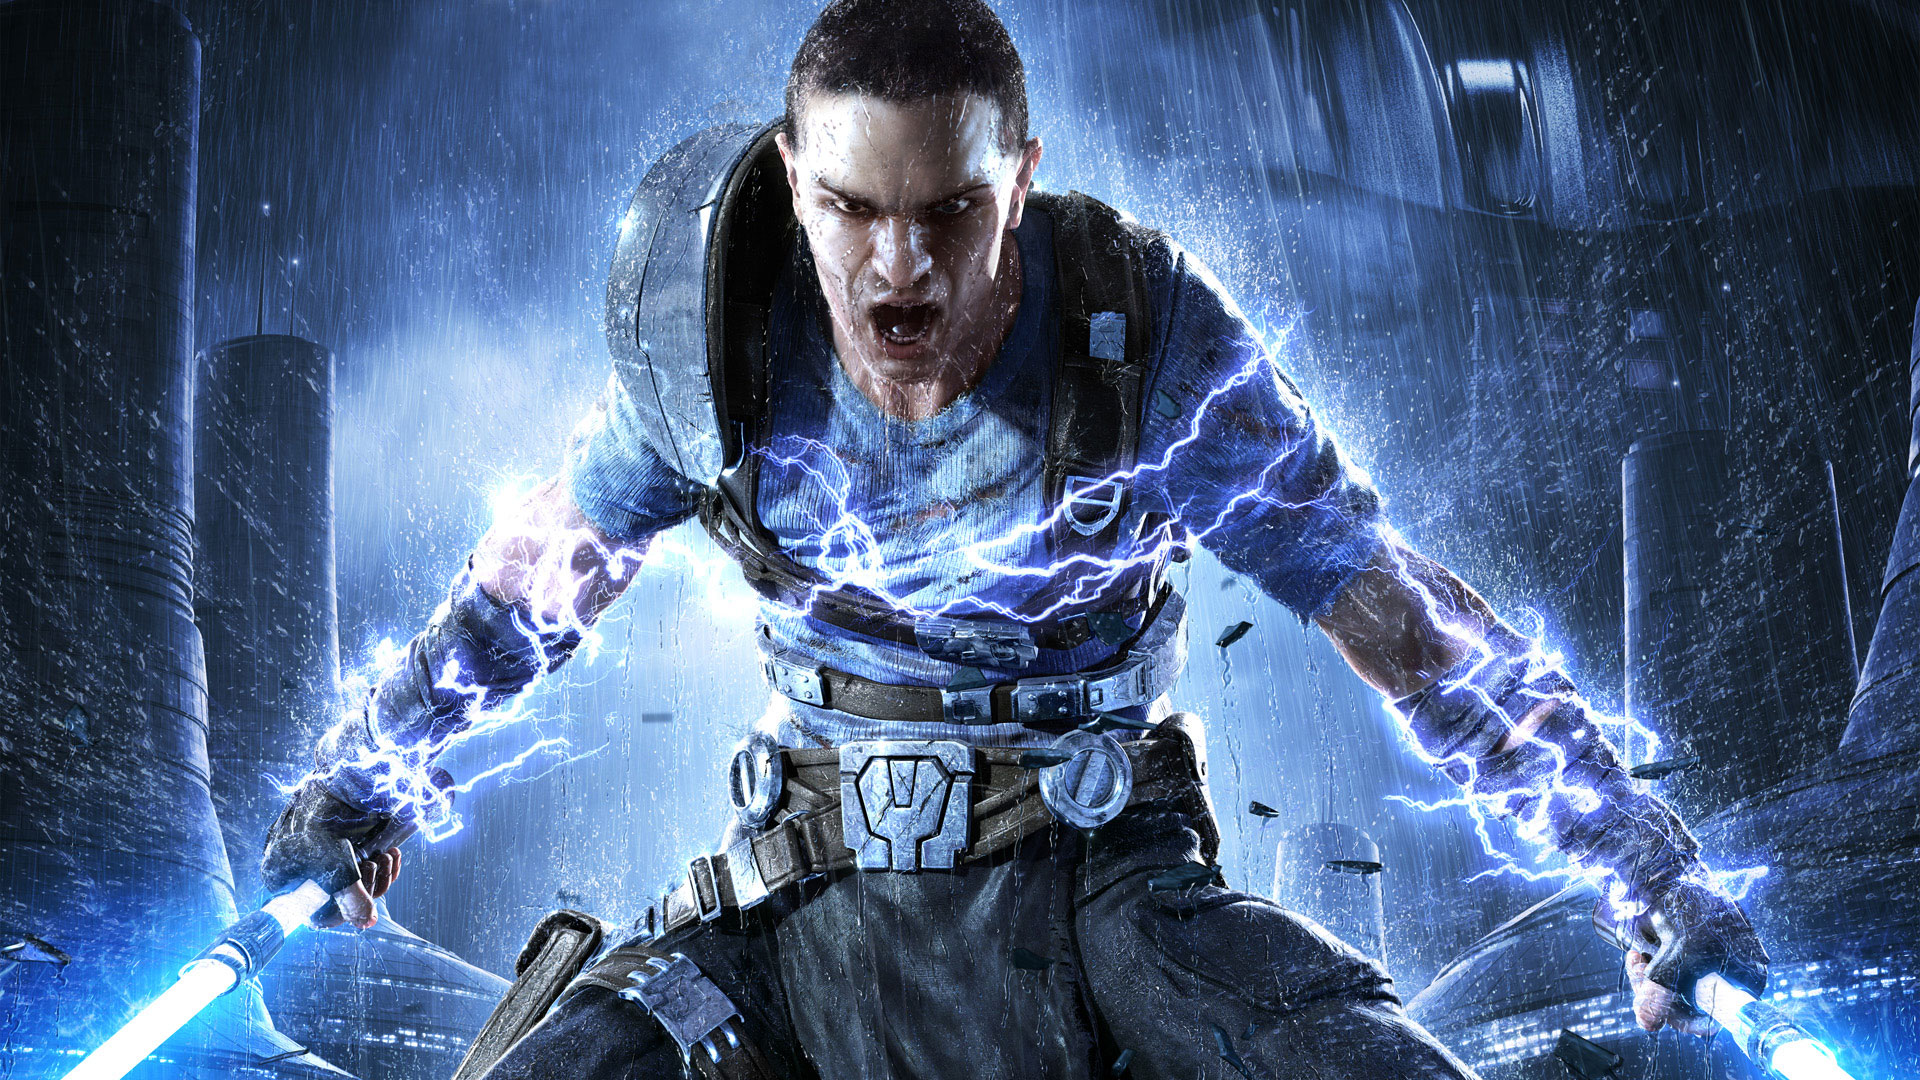 Star Wars The Force Unleashed 2 Wallpapers in HD 1920x1080